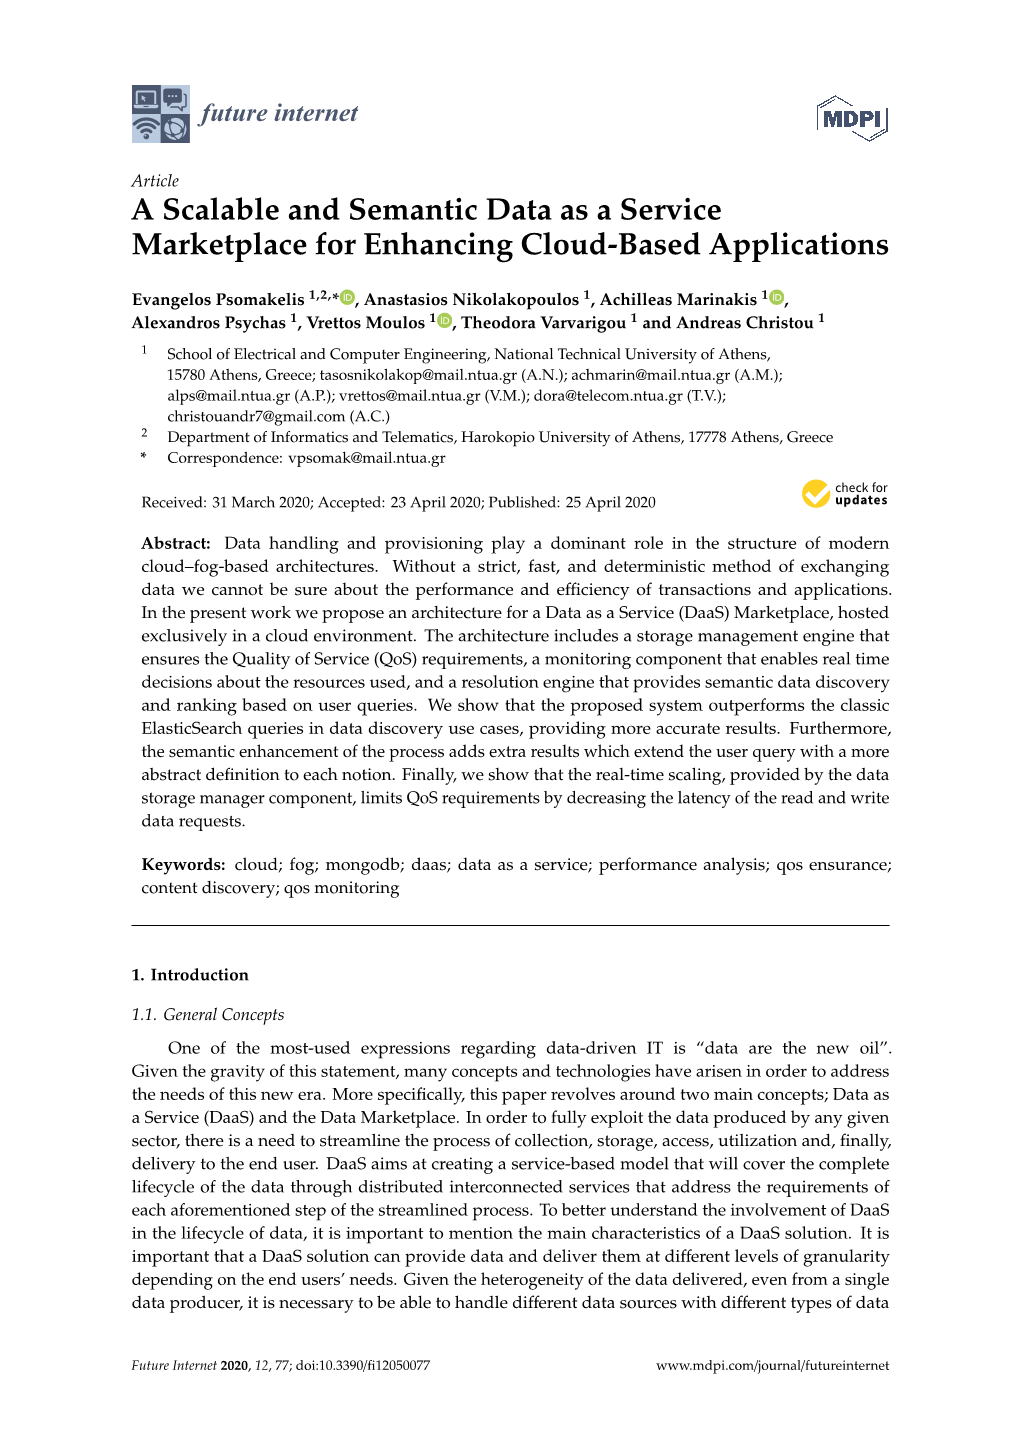 A Scalable and Semantic Data As a Service Marketplace for Enhancing Cloud-Based Applications